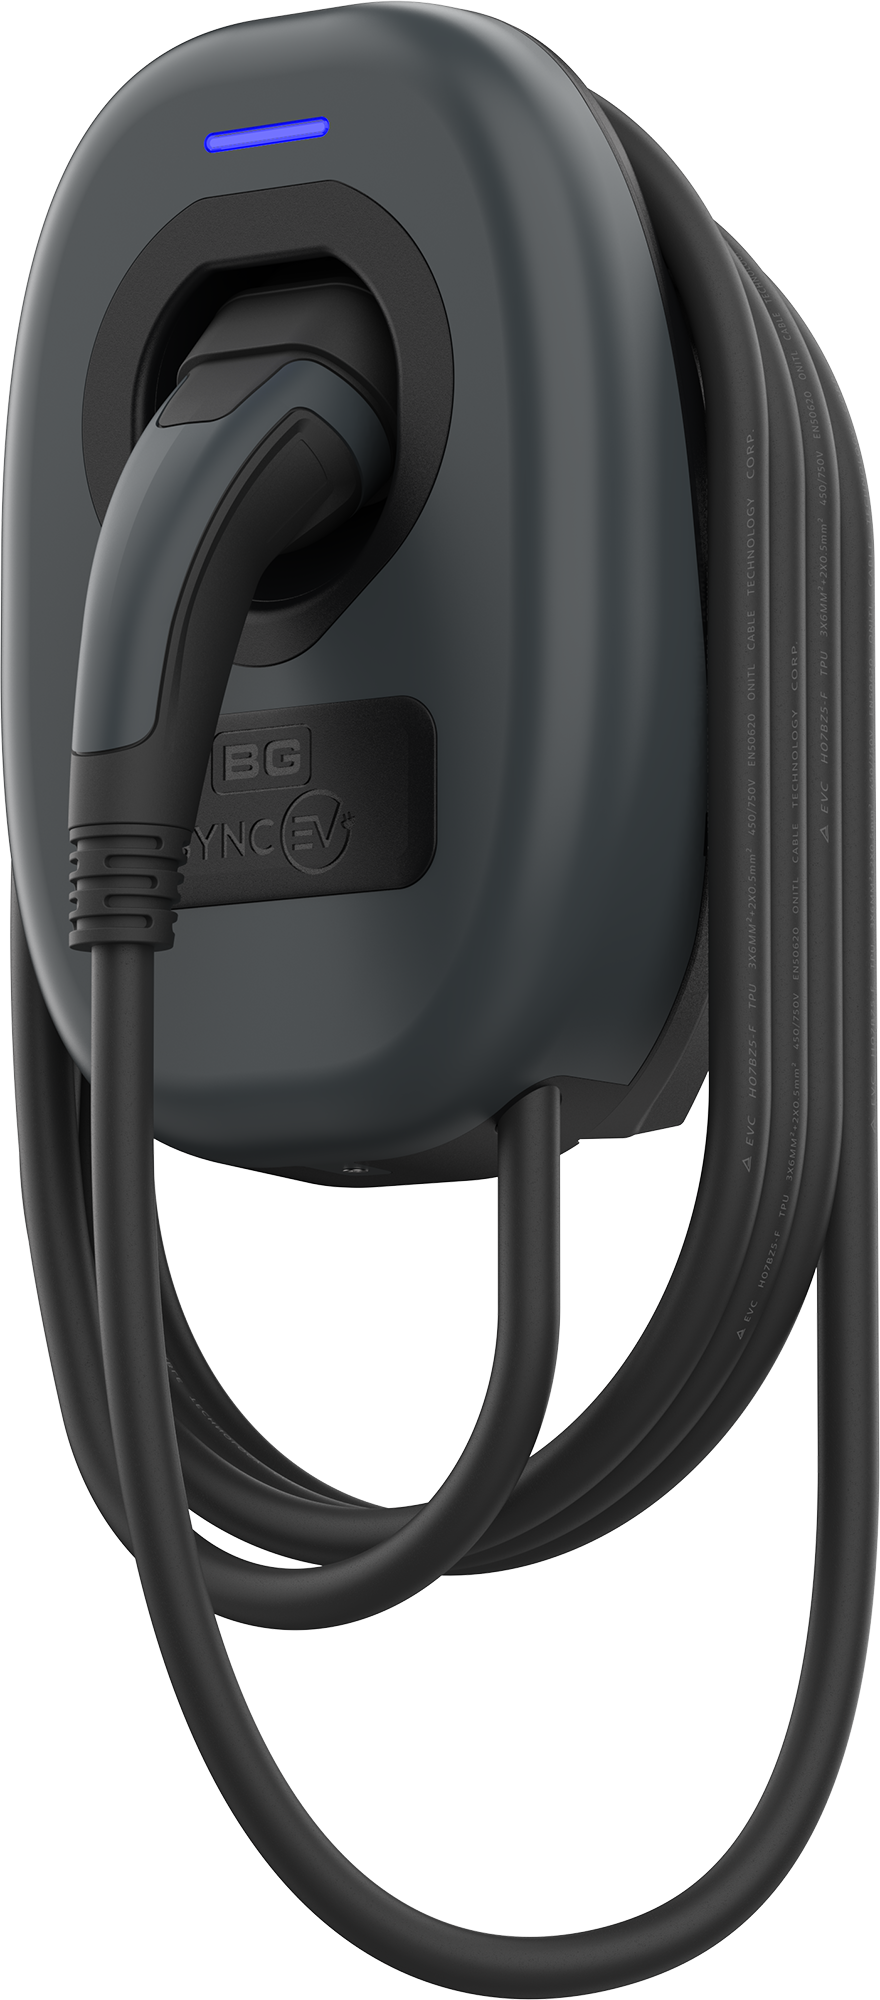 BG SyncEV EVWC2T7G 7.4kW Tethered Wall Charger with 7.5 Meter Cable, WiFi & Smart Functionality